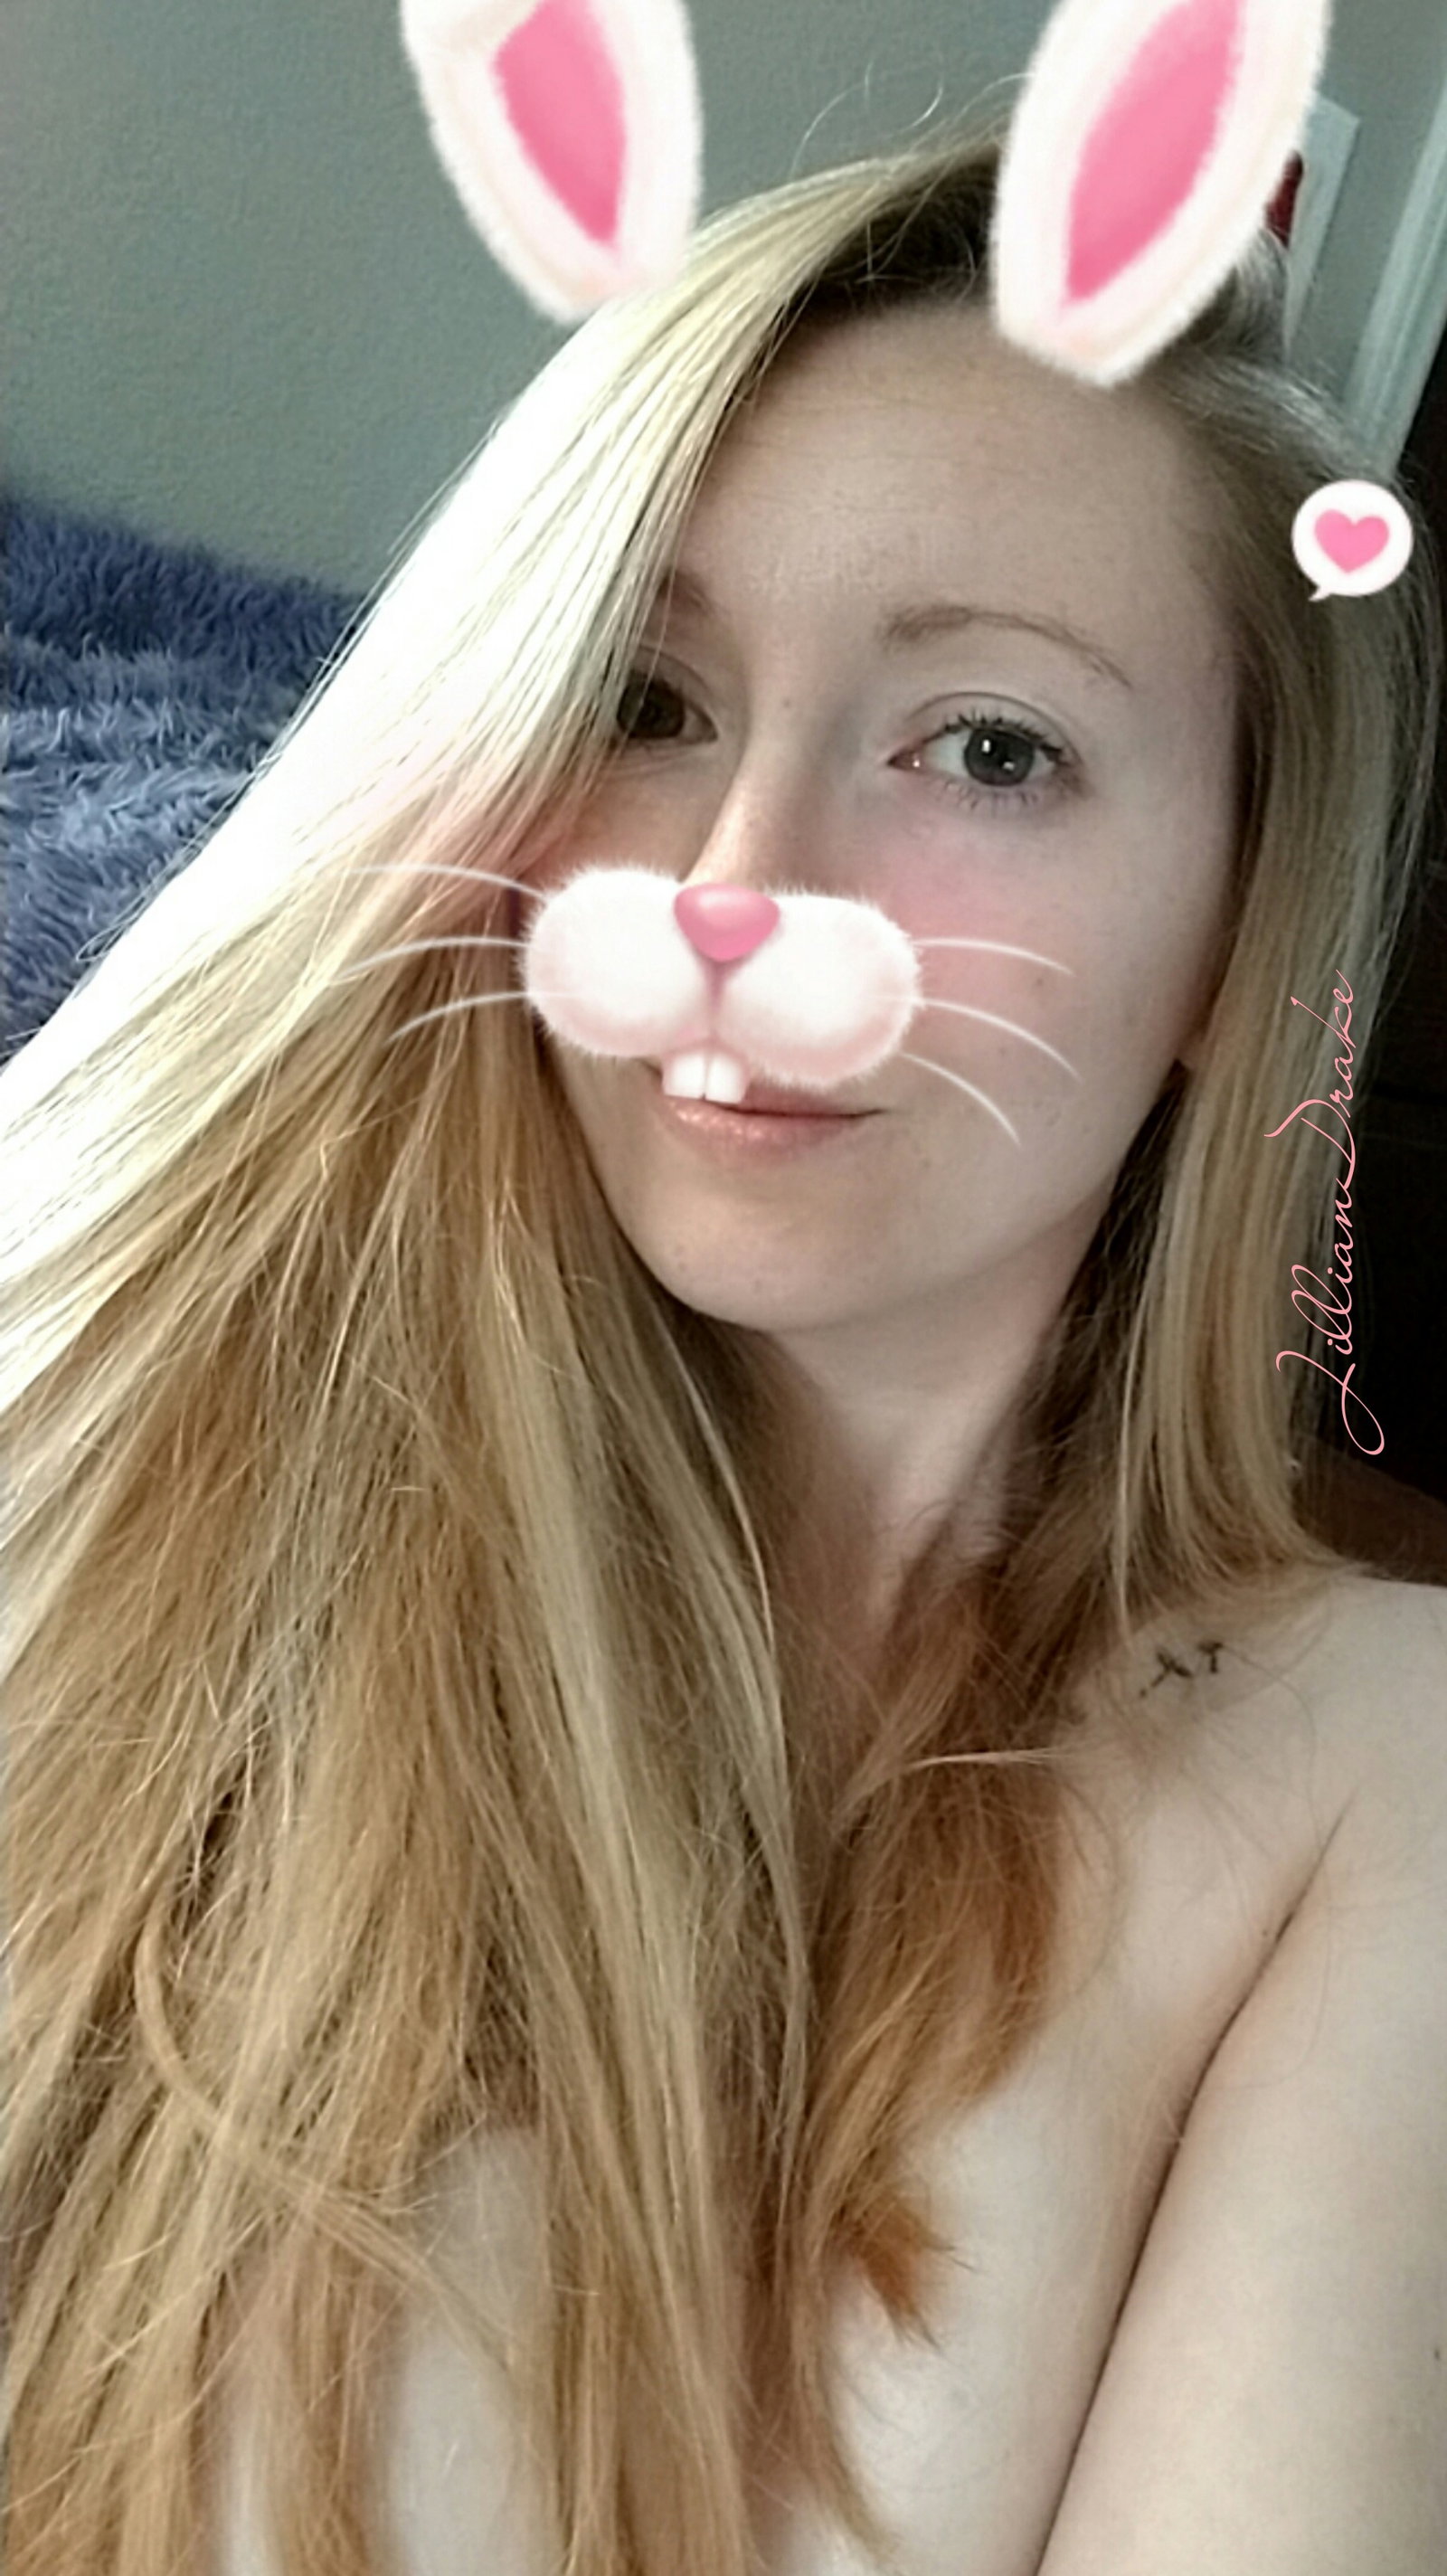 Photo by Jillian Drake with the username @JillianDrake, who is a star user,  April 11, 2019 at 3:57 PM and the text says 'You can find me on http://amateurporn.com/Jillian too! 🐰'